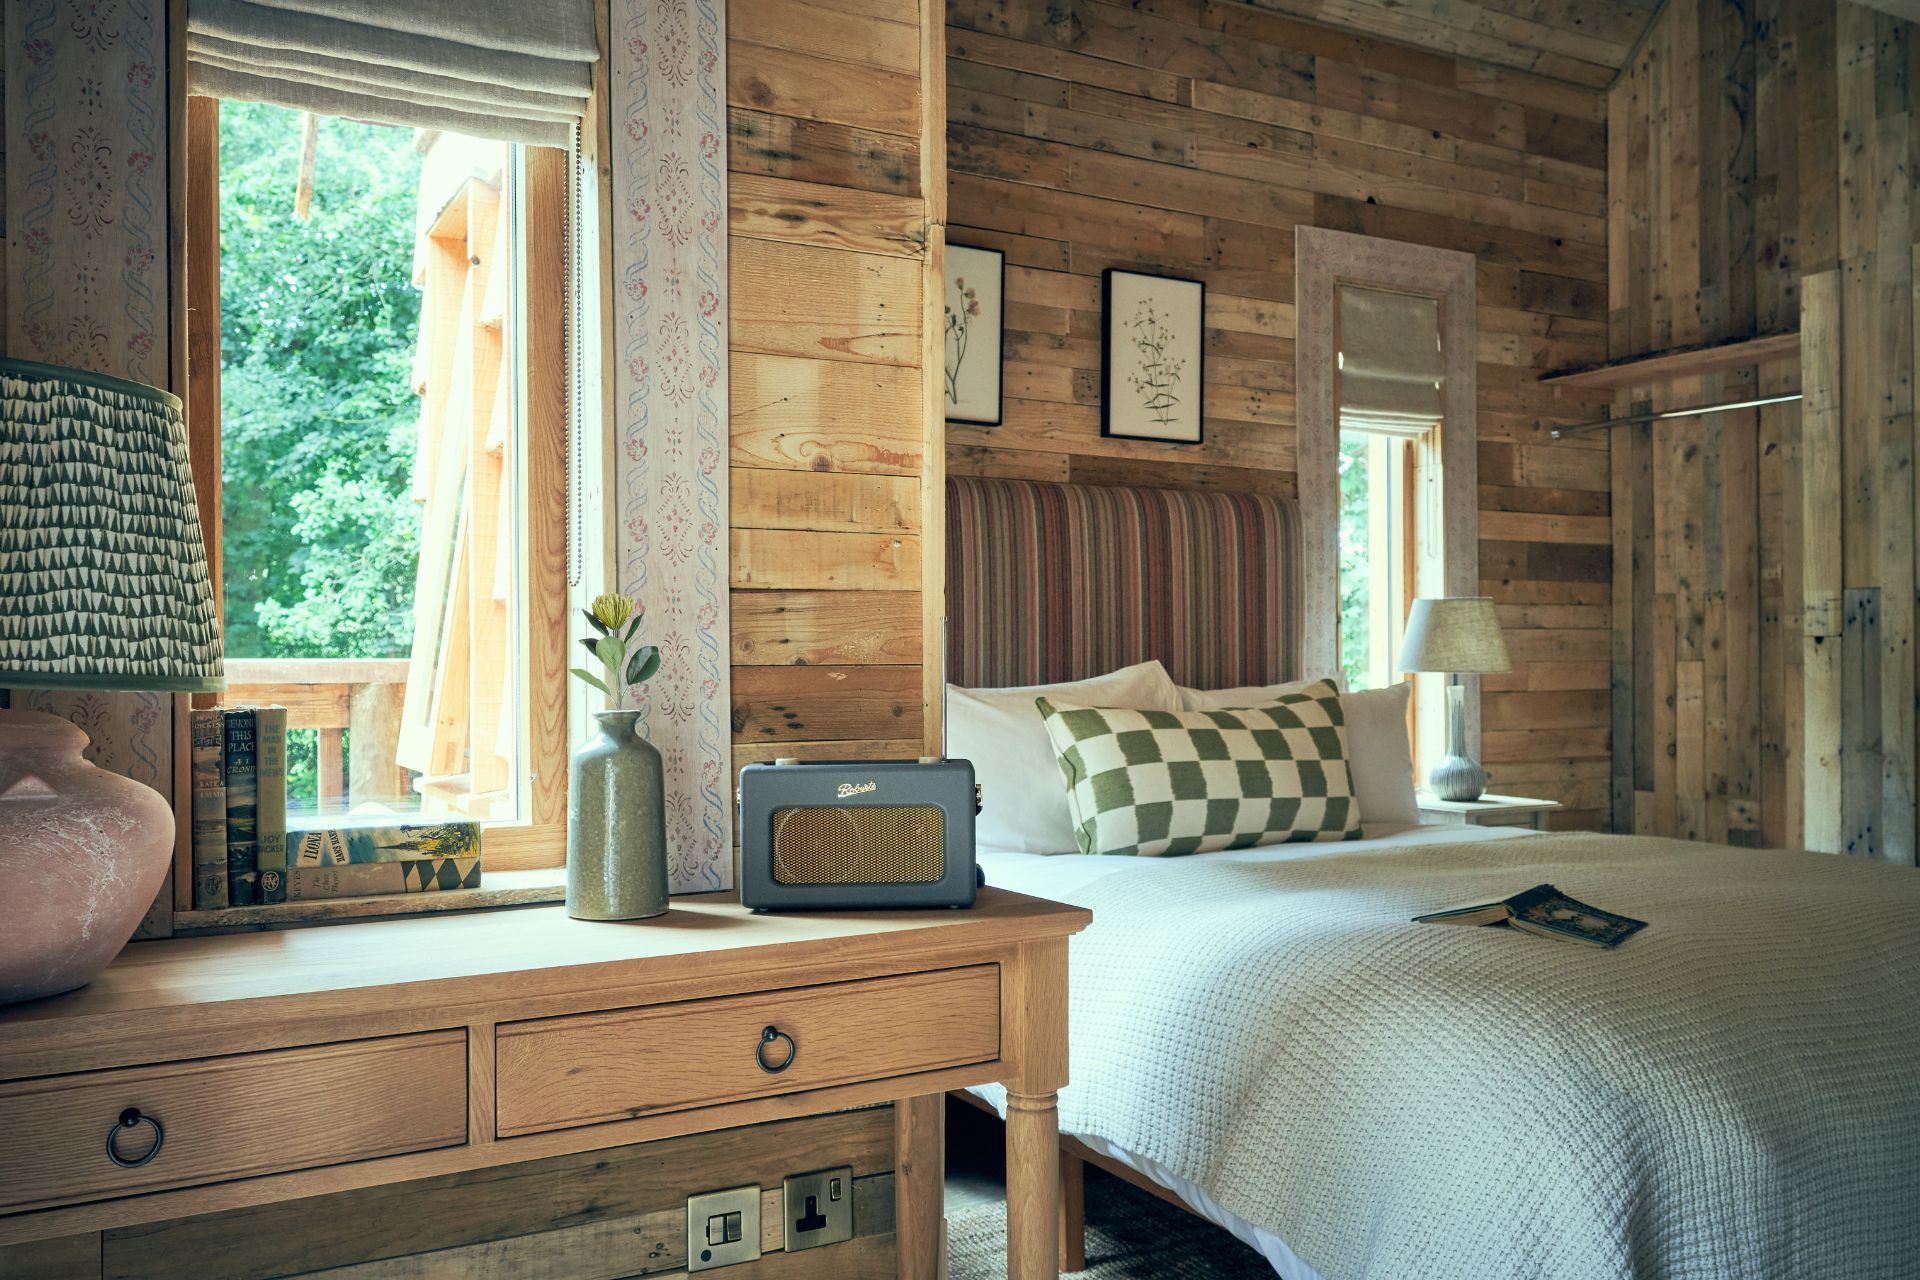 Wood-panelled bedroom with pale green sheets.